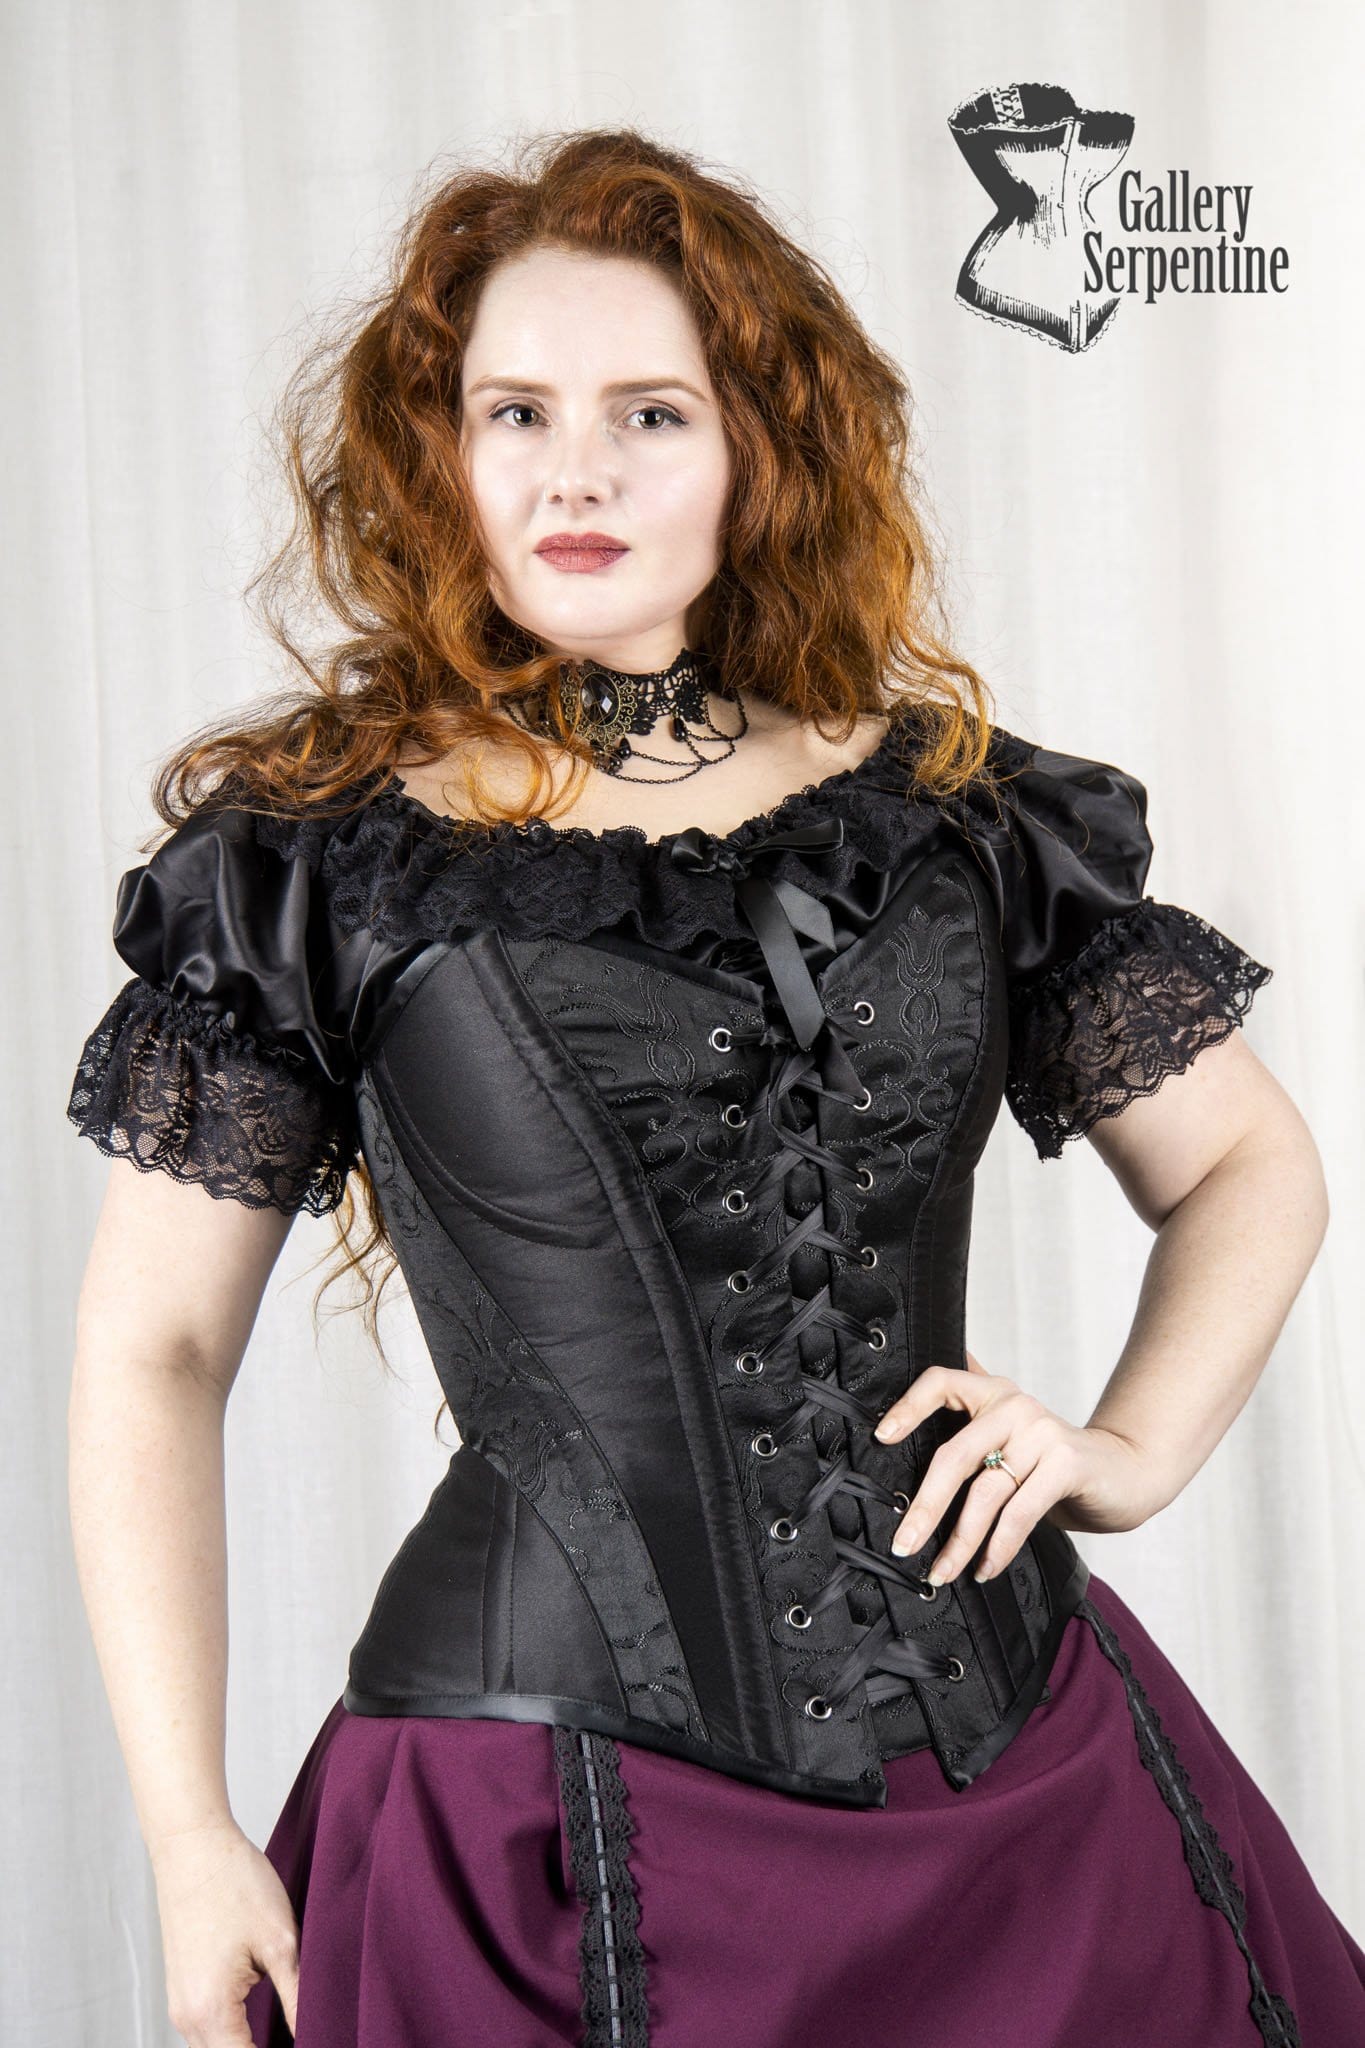 new corset style from Gallery Serpentine featuring front lacing and cups